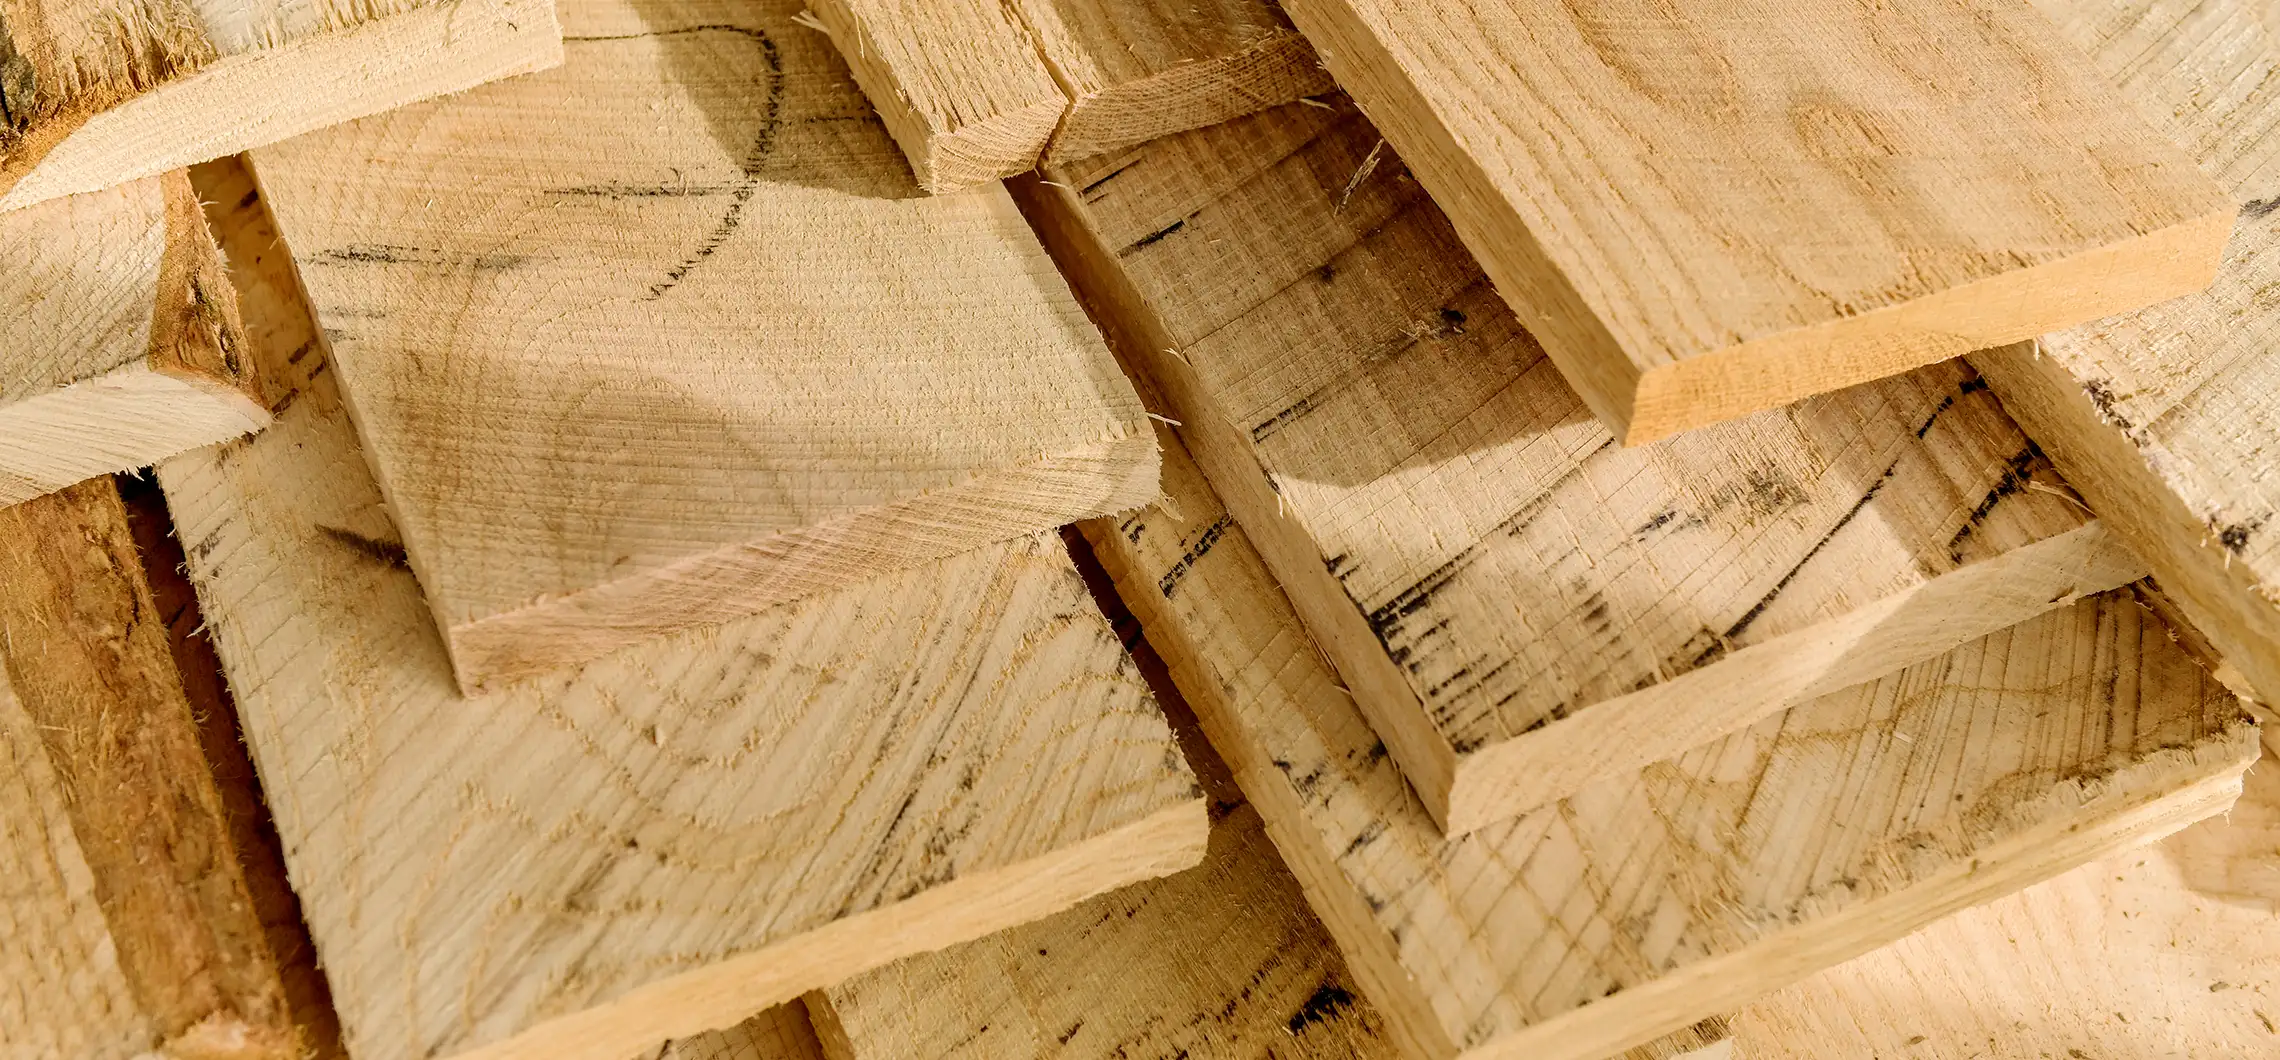 industry resources and sawmill resources for businesses manufacturing wood products